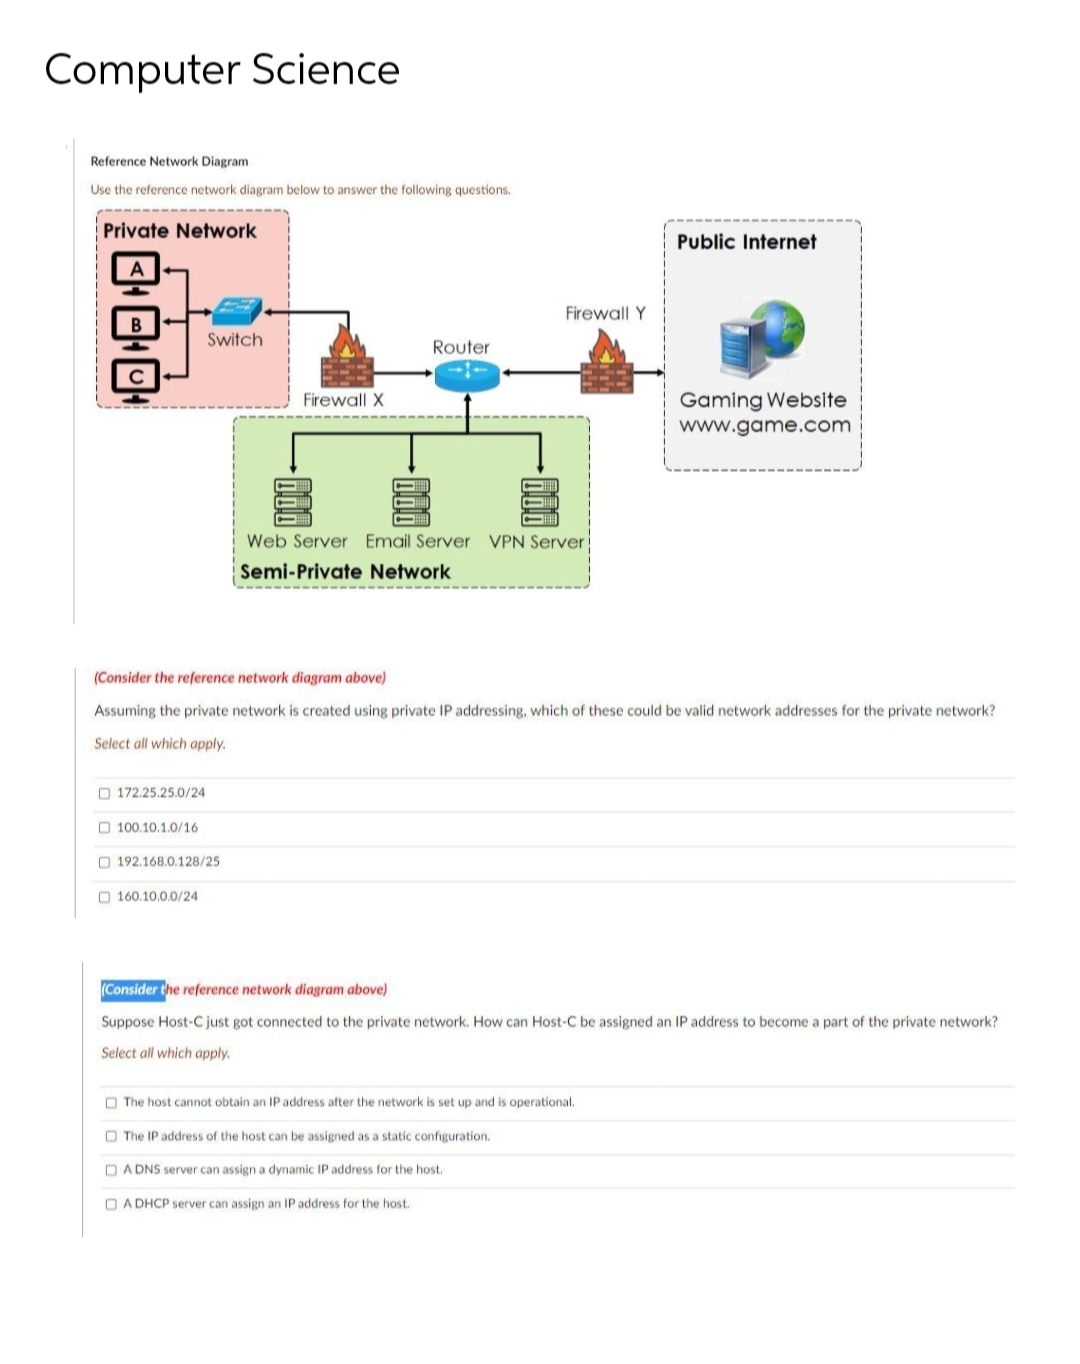 Computer Science
Reference Network Diagram
Use the reference network diagram below to answer the following questions.
Private Network
Public Internet
Firewall Y
Switch
Router
Firewall X
Gaming Website
www.game.com
Web Server Email Server VPN Server
Semi-Private Network
(Consider the reference network diagram above)
Assuming the private network is created using private IP addressing, which of these could be valid network addresses for the private network?
Select all which apply.
O 172.25.25.0/24
O 100.10.1.0/16
O 192.168.0.128/25
O 160.10.0.0/24
(Consider the reference network diagram above)
Suppose Host-C just got connected to the private network. How can Host-C be assigned an IP address to become a part of the private network?
Select all which apply.
O The host cannot obtain an IP address after the network is set up and is operational.
O The IP address of the host can be assigned as a static configuration.
O A DNS server can assign a dynamic IP address for the host.
O A DHCP server can assign an IP address for the host.
